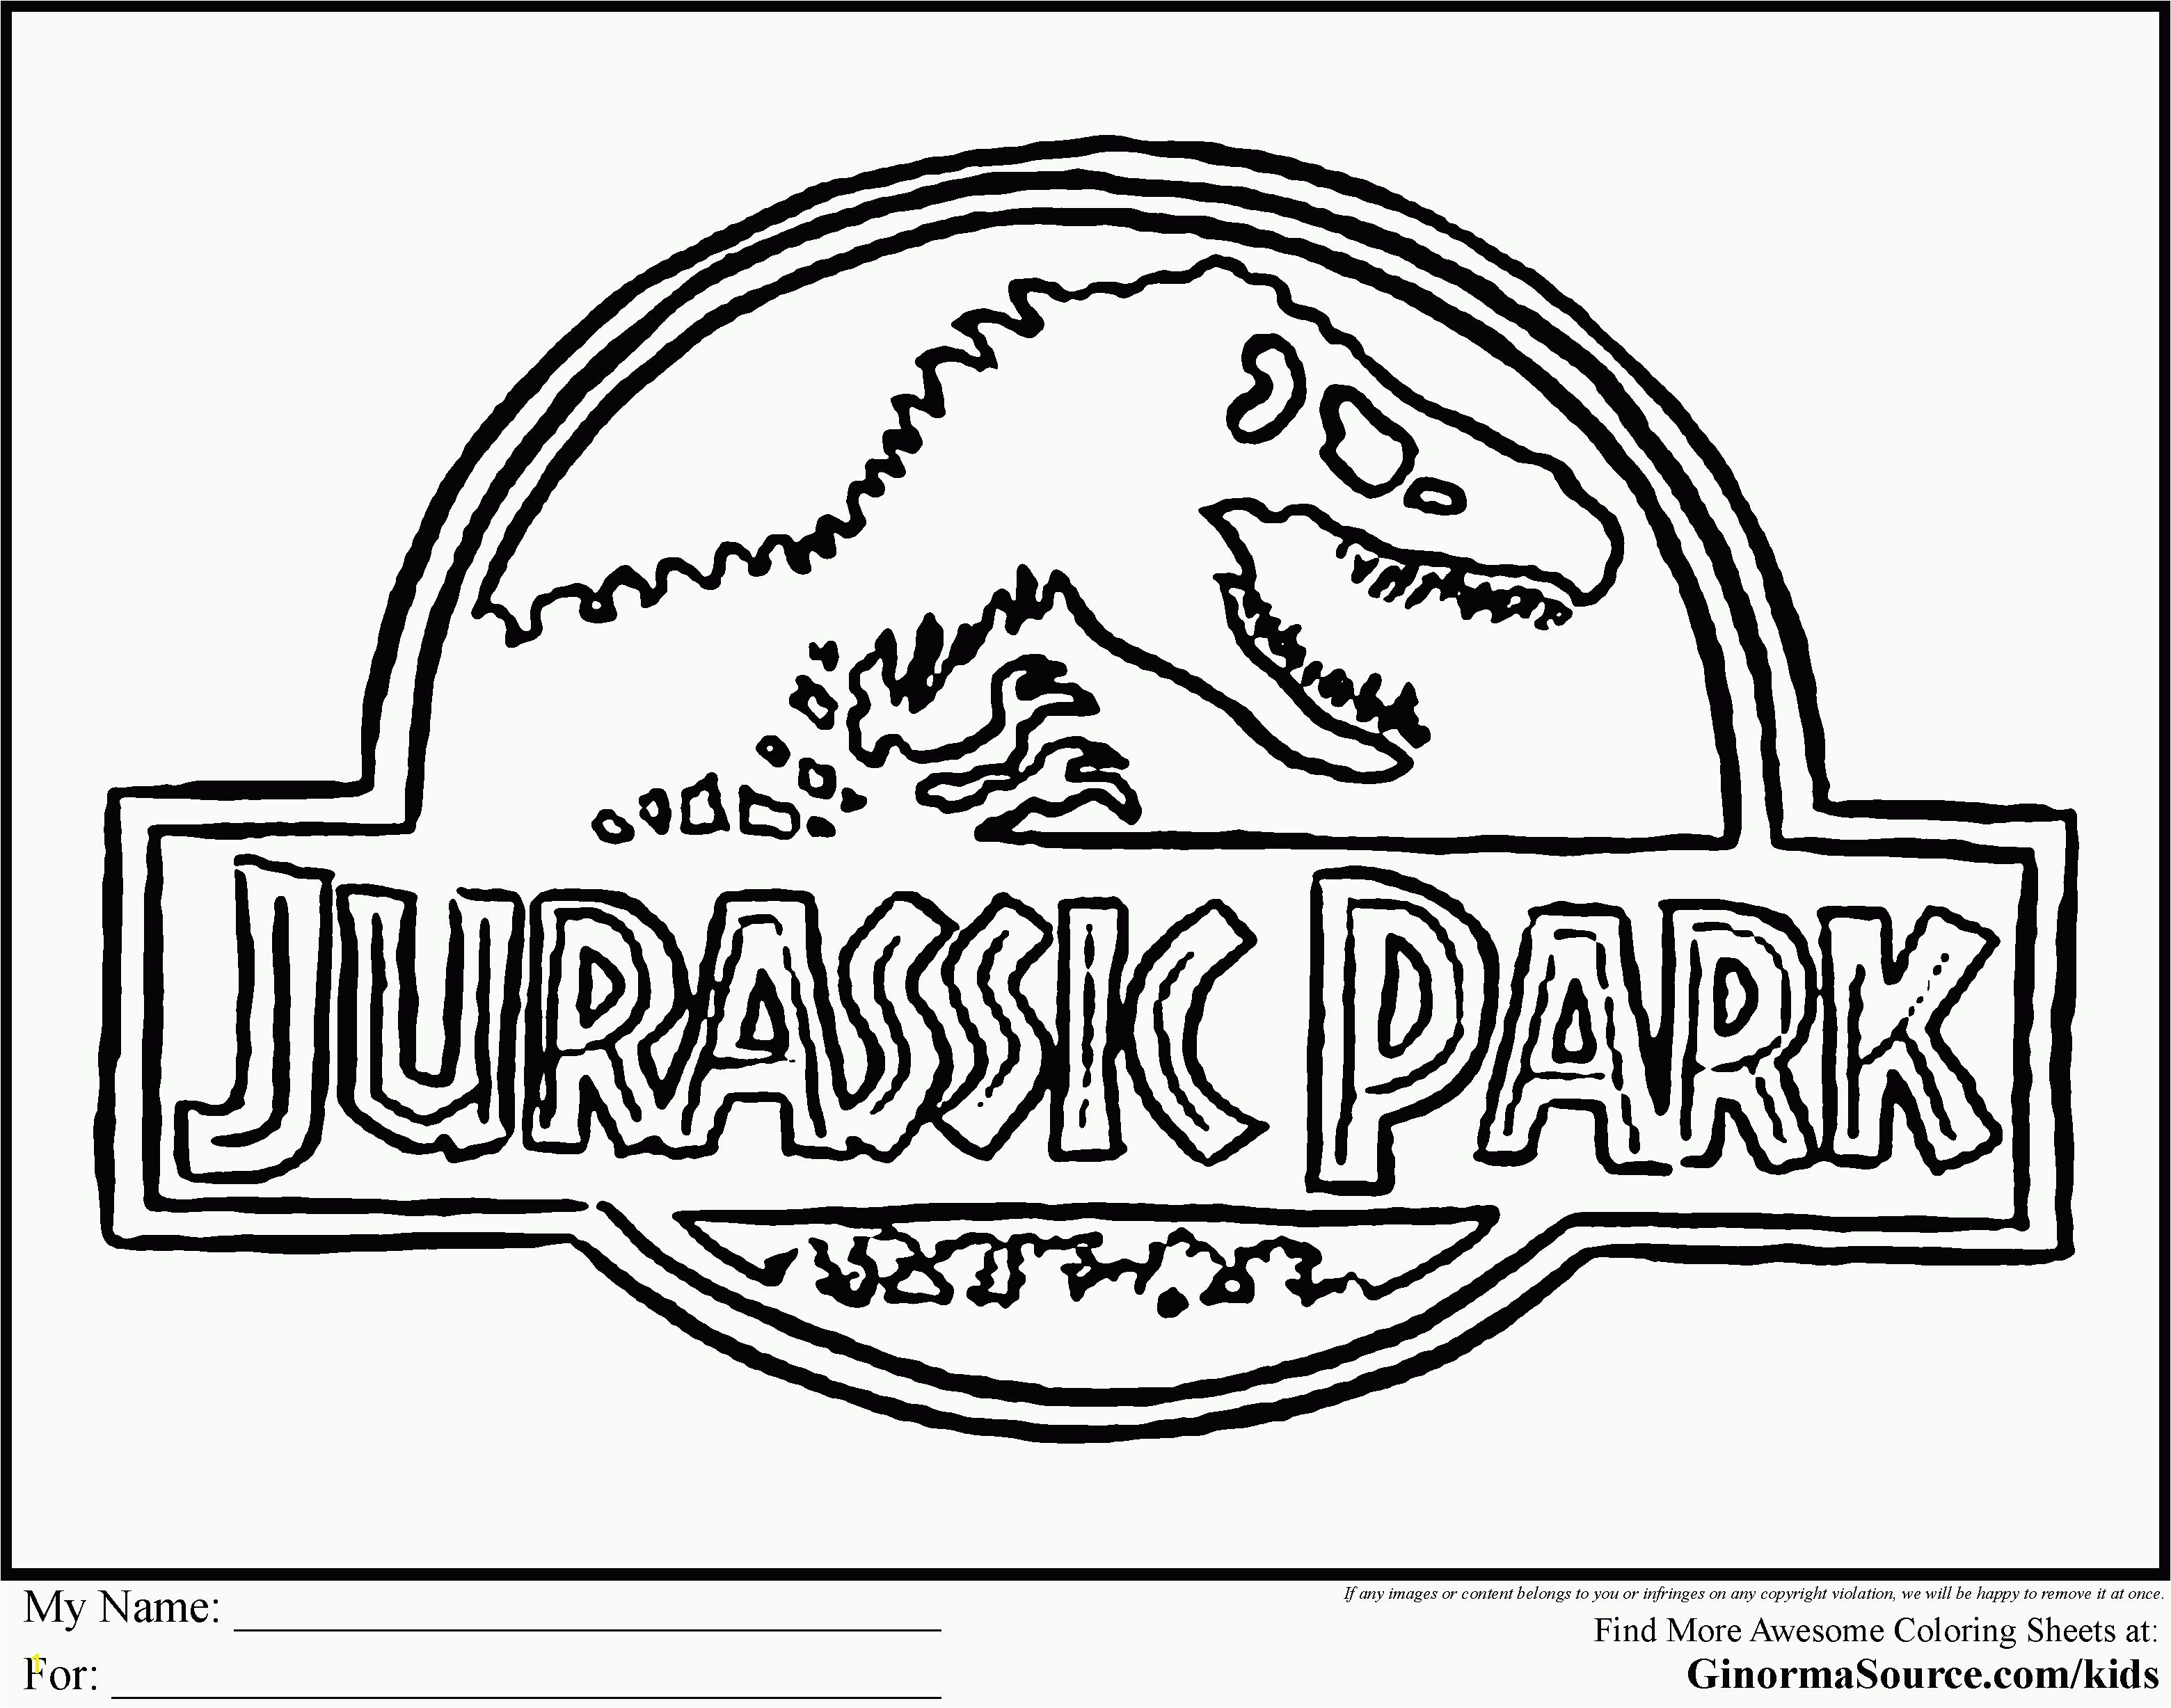 Jurassic World Coloring Pages Jurassic Park Coloring Pages Save Jurassic World Coloring Pages Line New